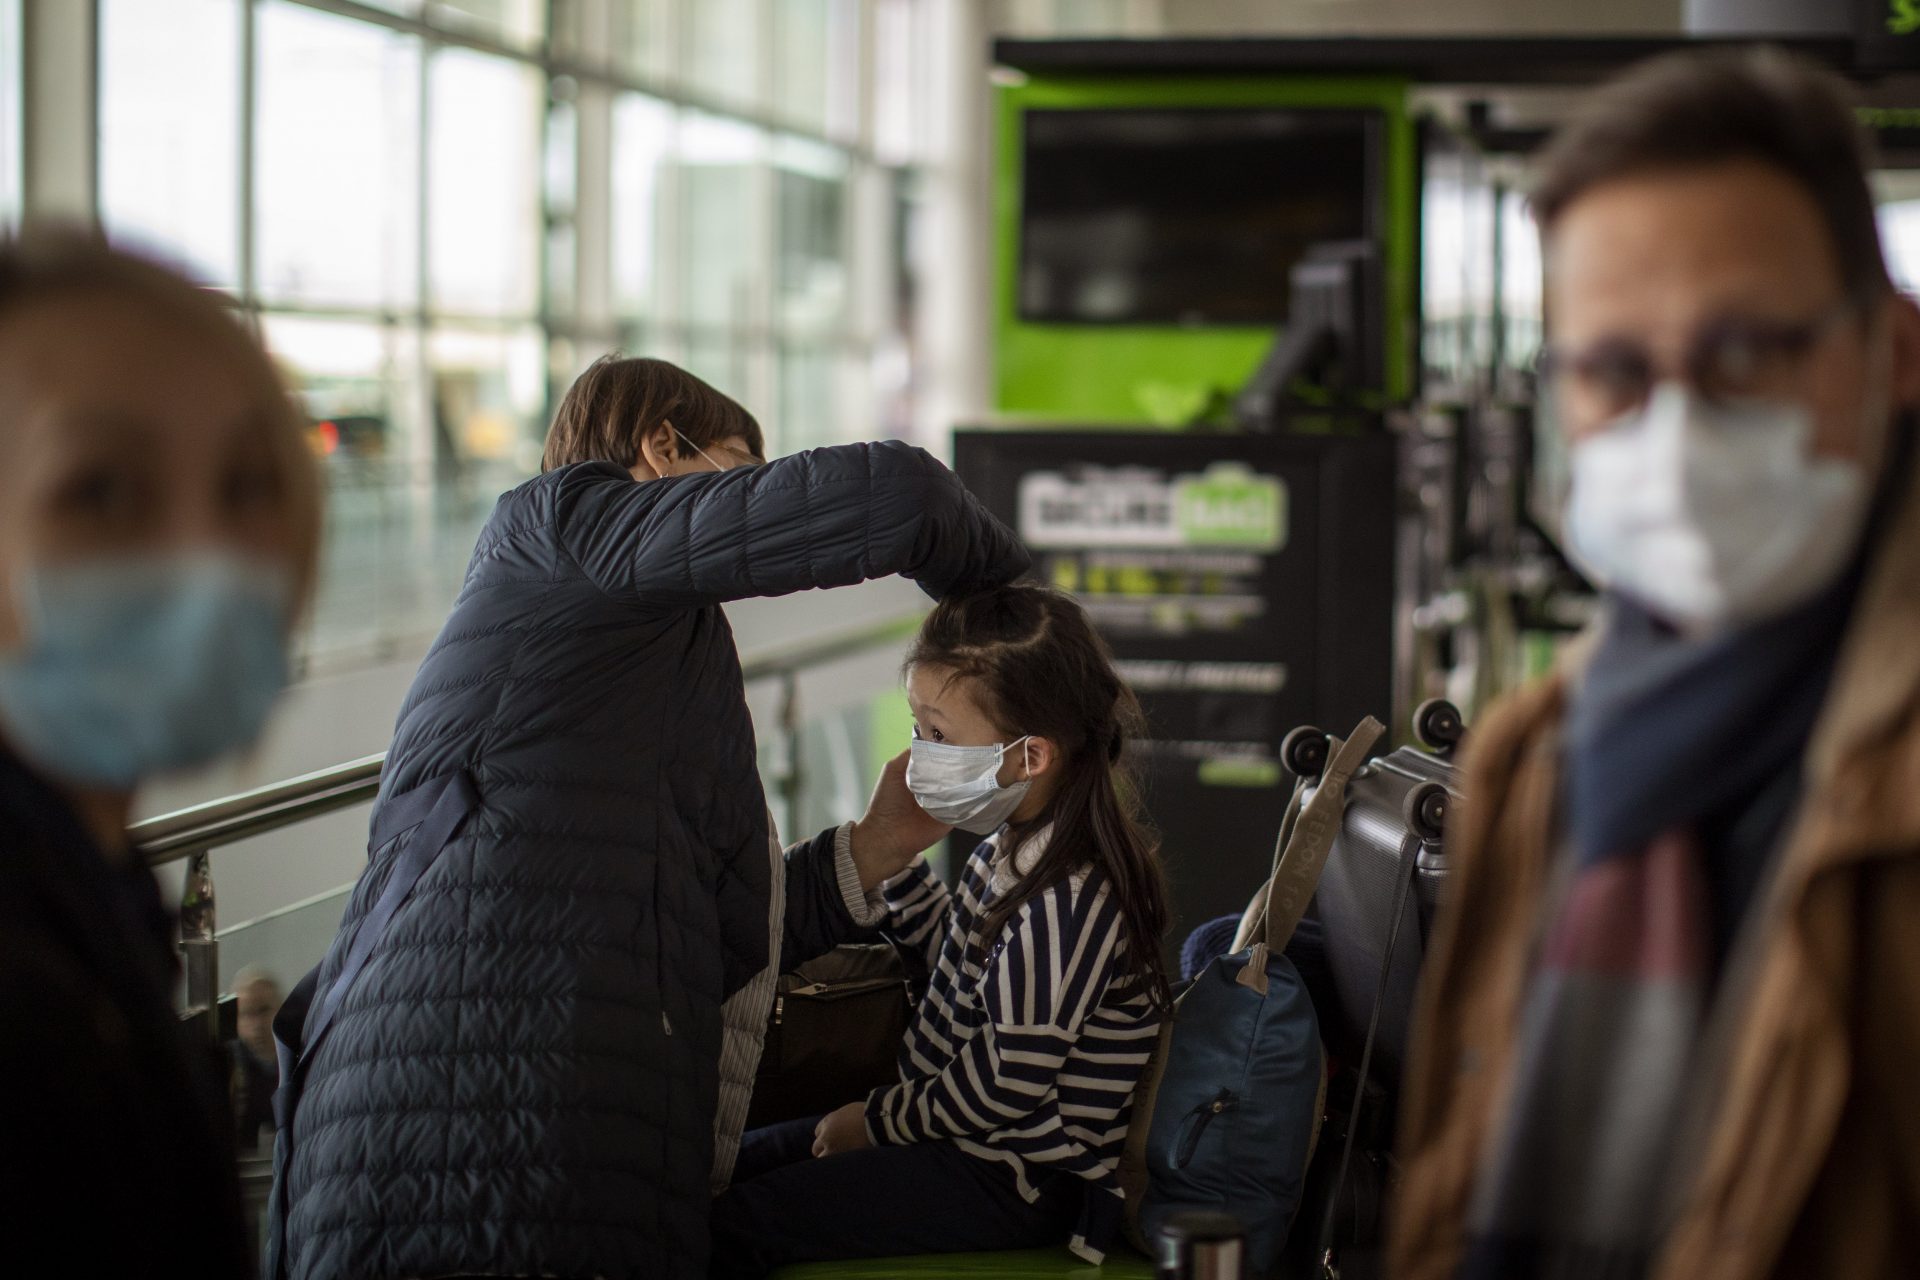 A woman fixes a mask to a child at Barcelona airport, Spain, Thursday, March 12, 2020. President Donald Trump, who had downplayed the coronavirus for weeks, suddenly struck a different tone, announcing strict rules on restricting travel from much of Europe to begin this weekend. For most people, the new coronavirus causes only mild or moderate symptoms, such as fever and cough. For some, especially older adults and people with existing health problems, it can cause more severe illness, including pneumonia.